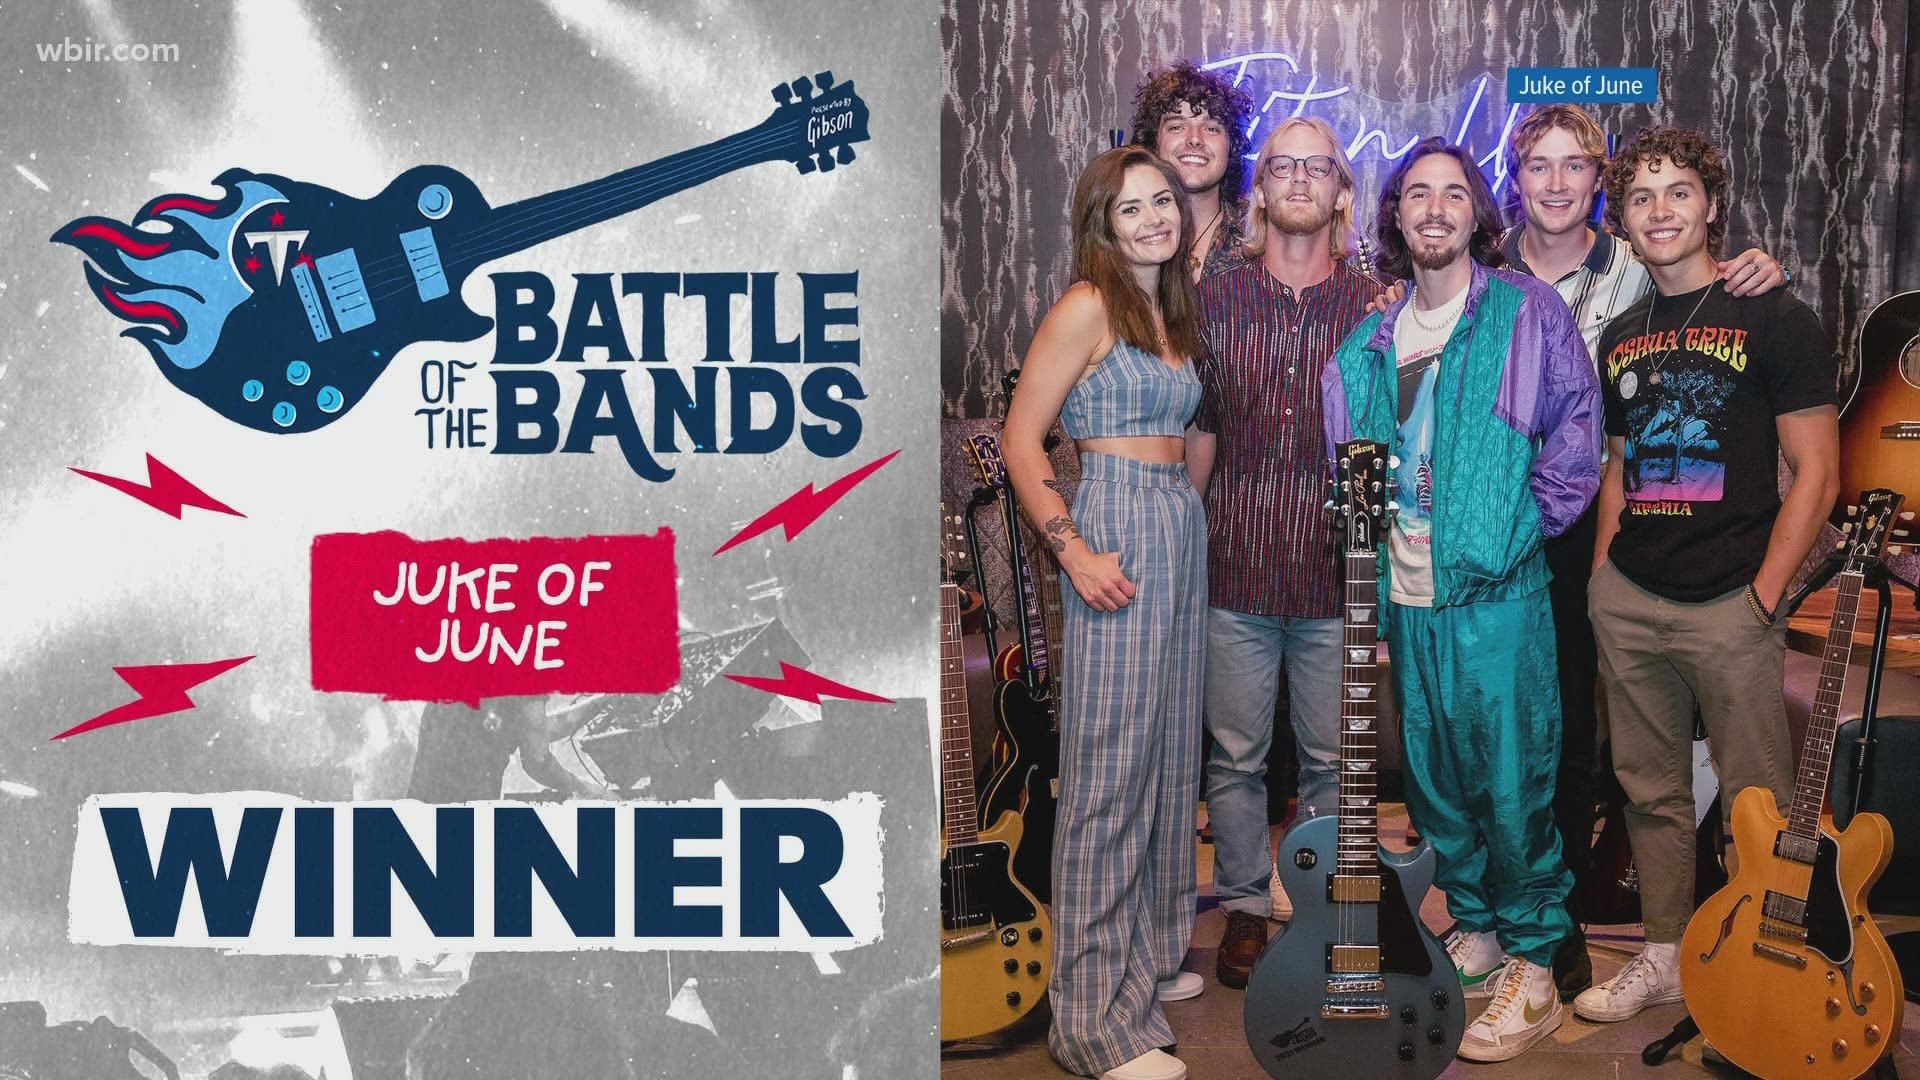 Catch Juke of June, featuring Knoxville guitarist Jackson Kilburn, at the halftime of the Tennessee Titans vs. Miami Dolphins game on January 2, 2022.